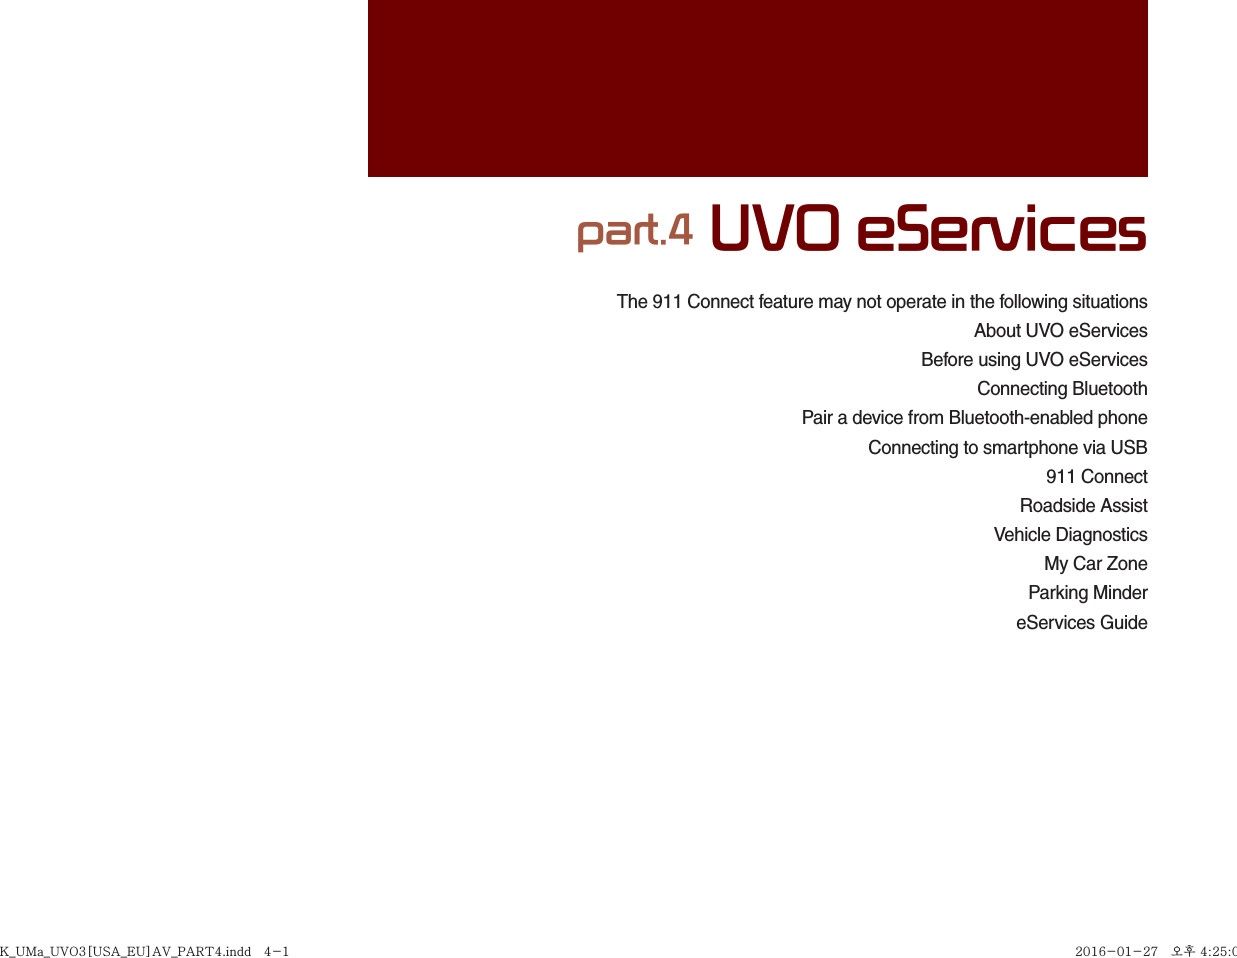 The 911 Connect feature may not operate in the following situationsAbout UVO eServicesBefore using UVO eServices Connecting BluetoothPair a device from Bluetooth-enabled phoneConnecting to smartphone via USB911 ConnectRoadside AssistVehicle DiagnosticsMy Car ZoneParking MindereServices Guidepart.4 UVO eServicesK_UMa_UVO3[USA_EU]AV_PART4.indd   4-1K_UMa_UVO3[USA_EU]AV_PART4.indd   4-1 2016-01-27   오후 4:25:002016-01-27   오후 4:25:0